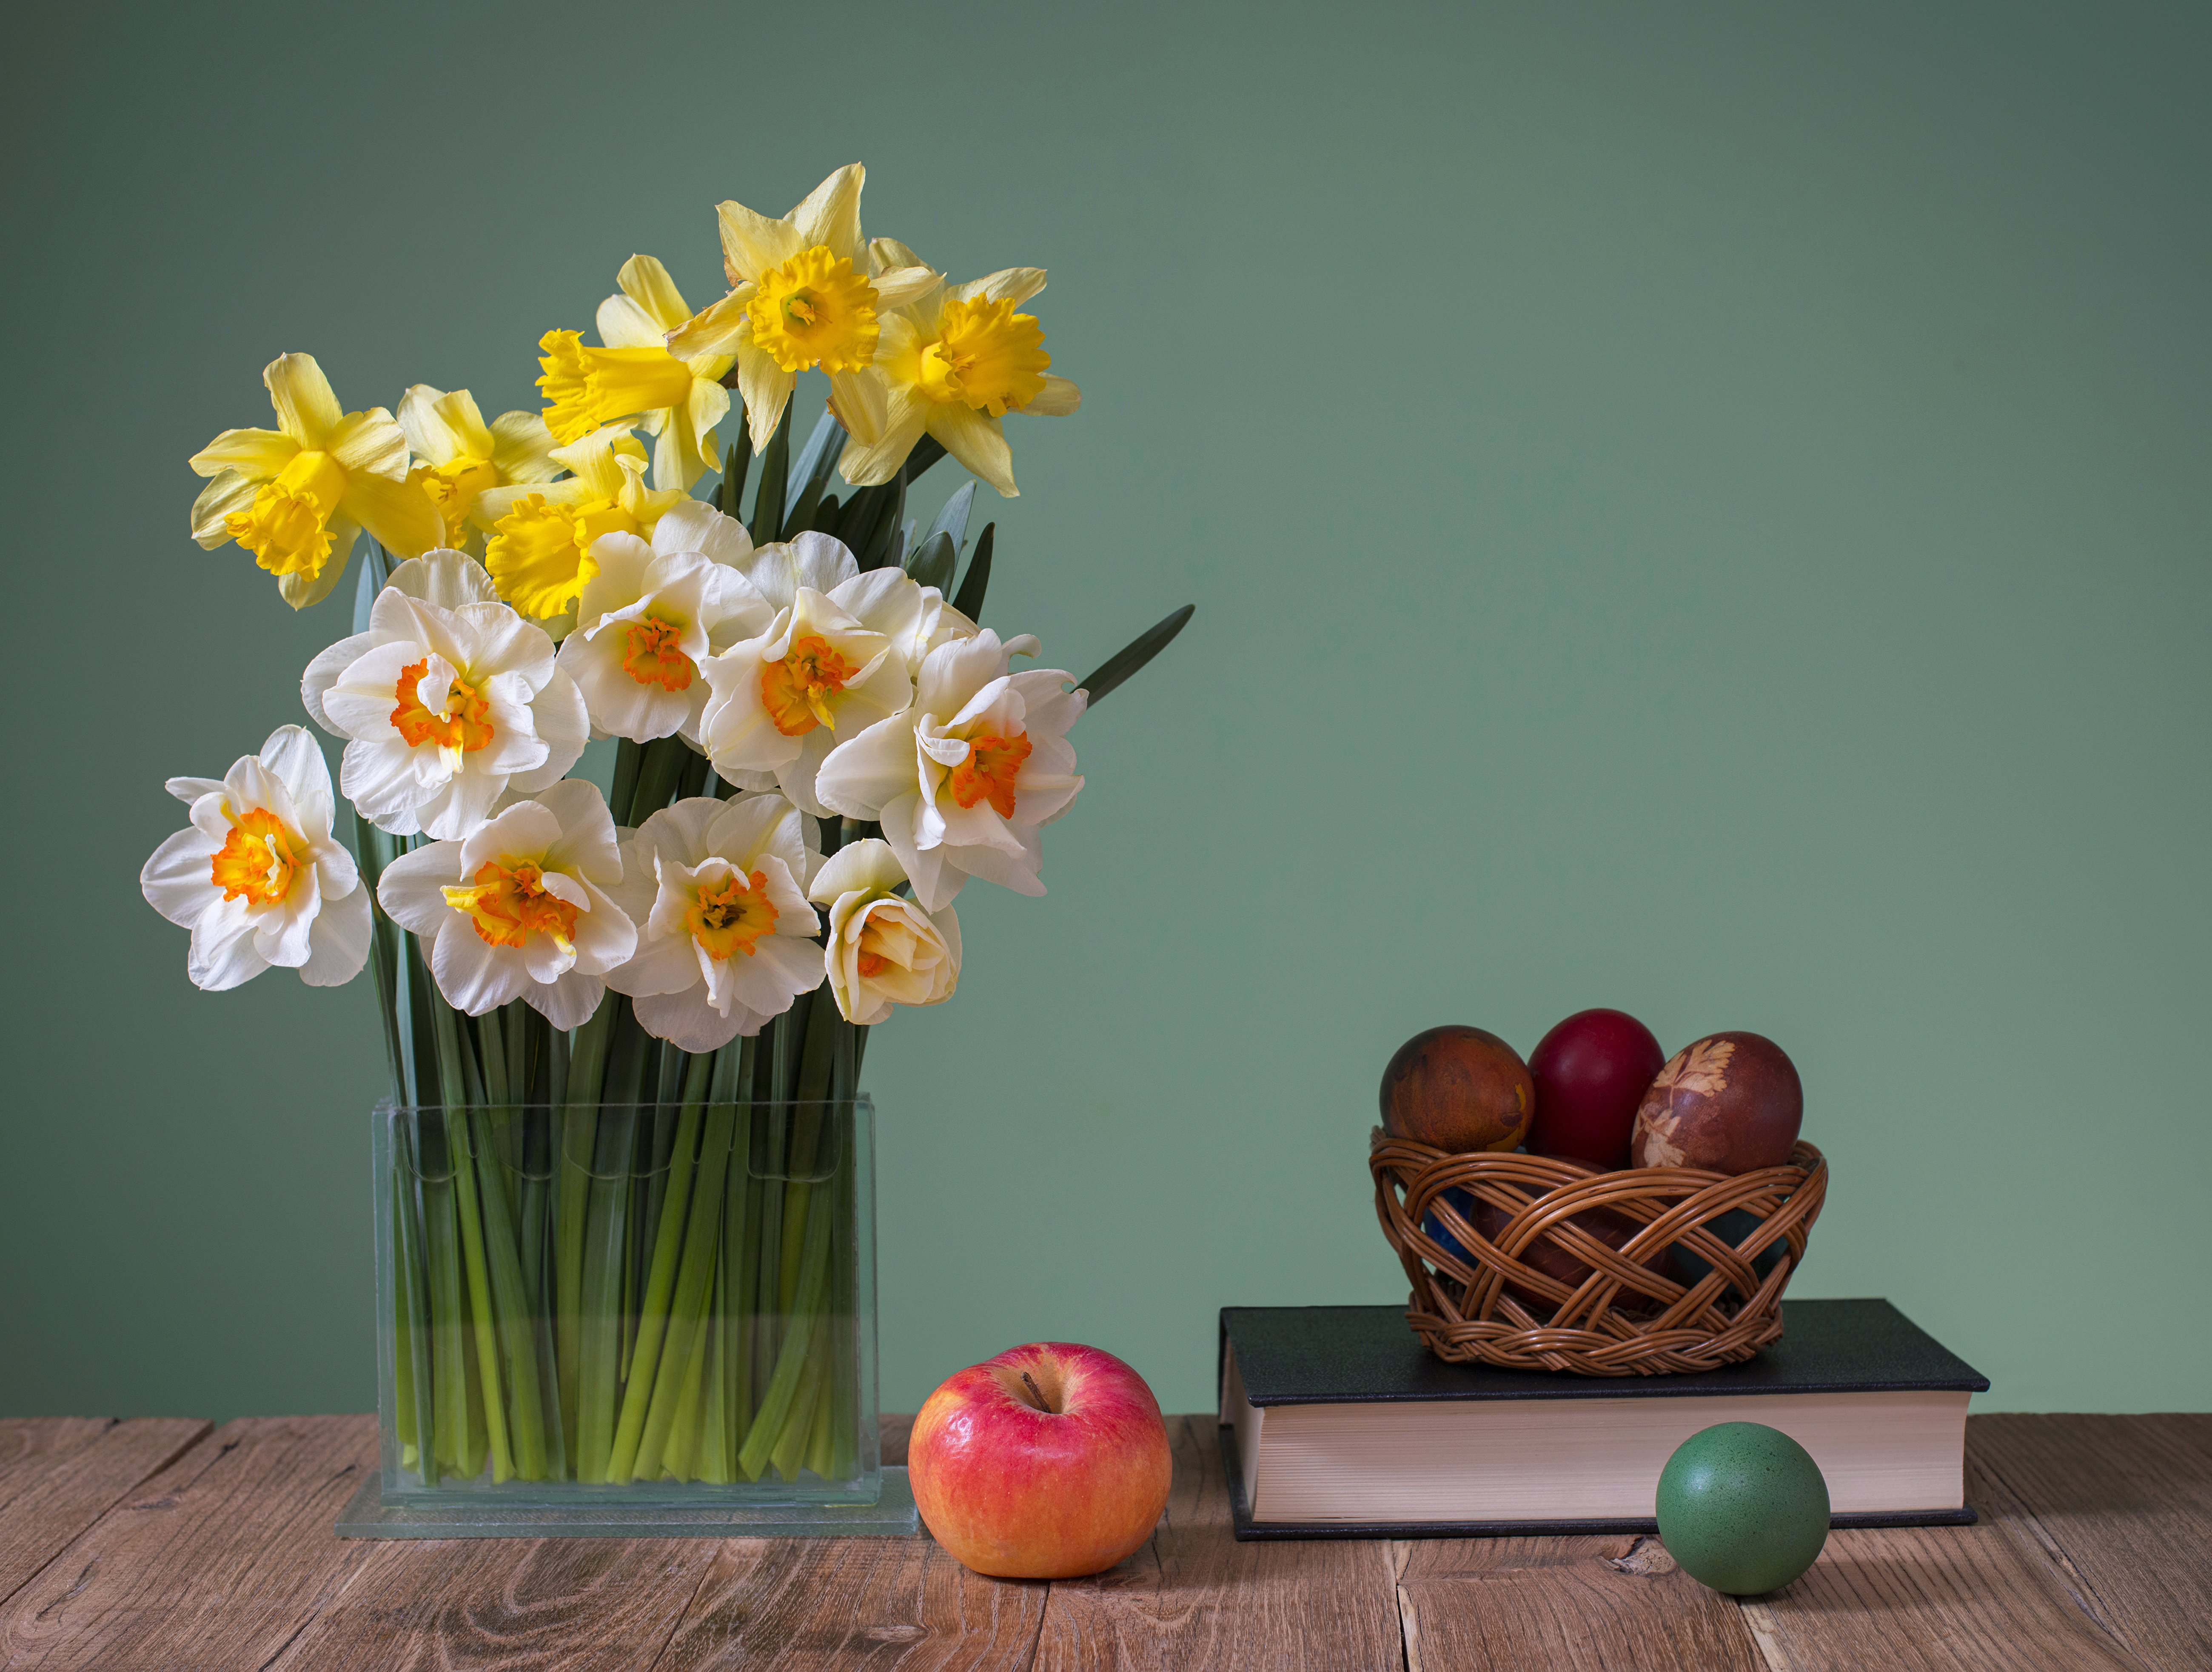 till life, Daffodils, Apples, Easter, Vase, Book, Eggs, Colored, Background, Flowers Wallpaper